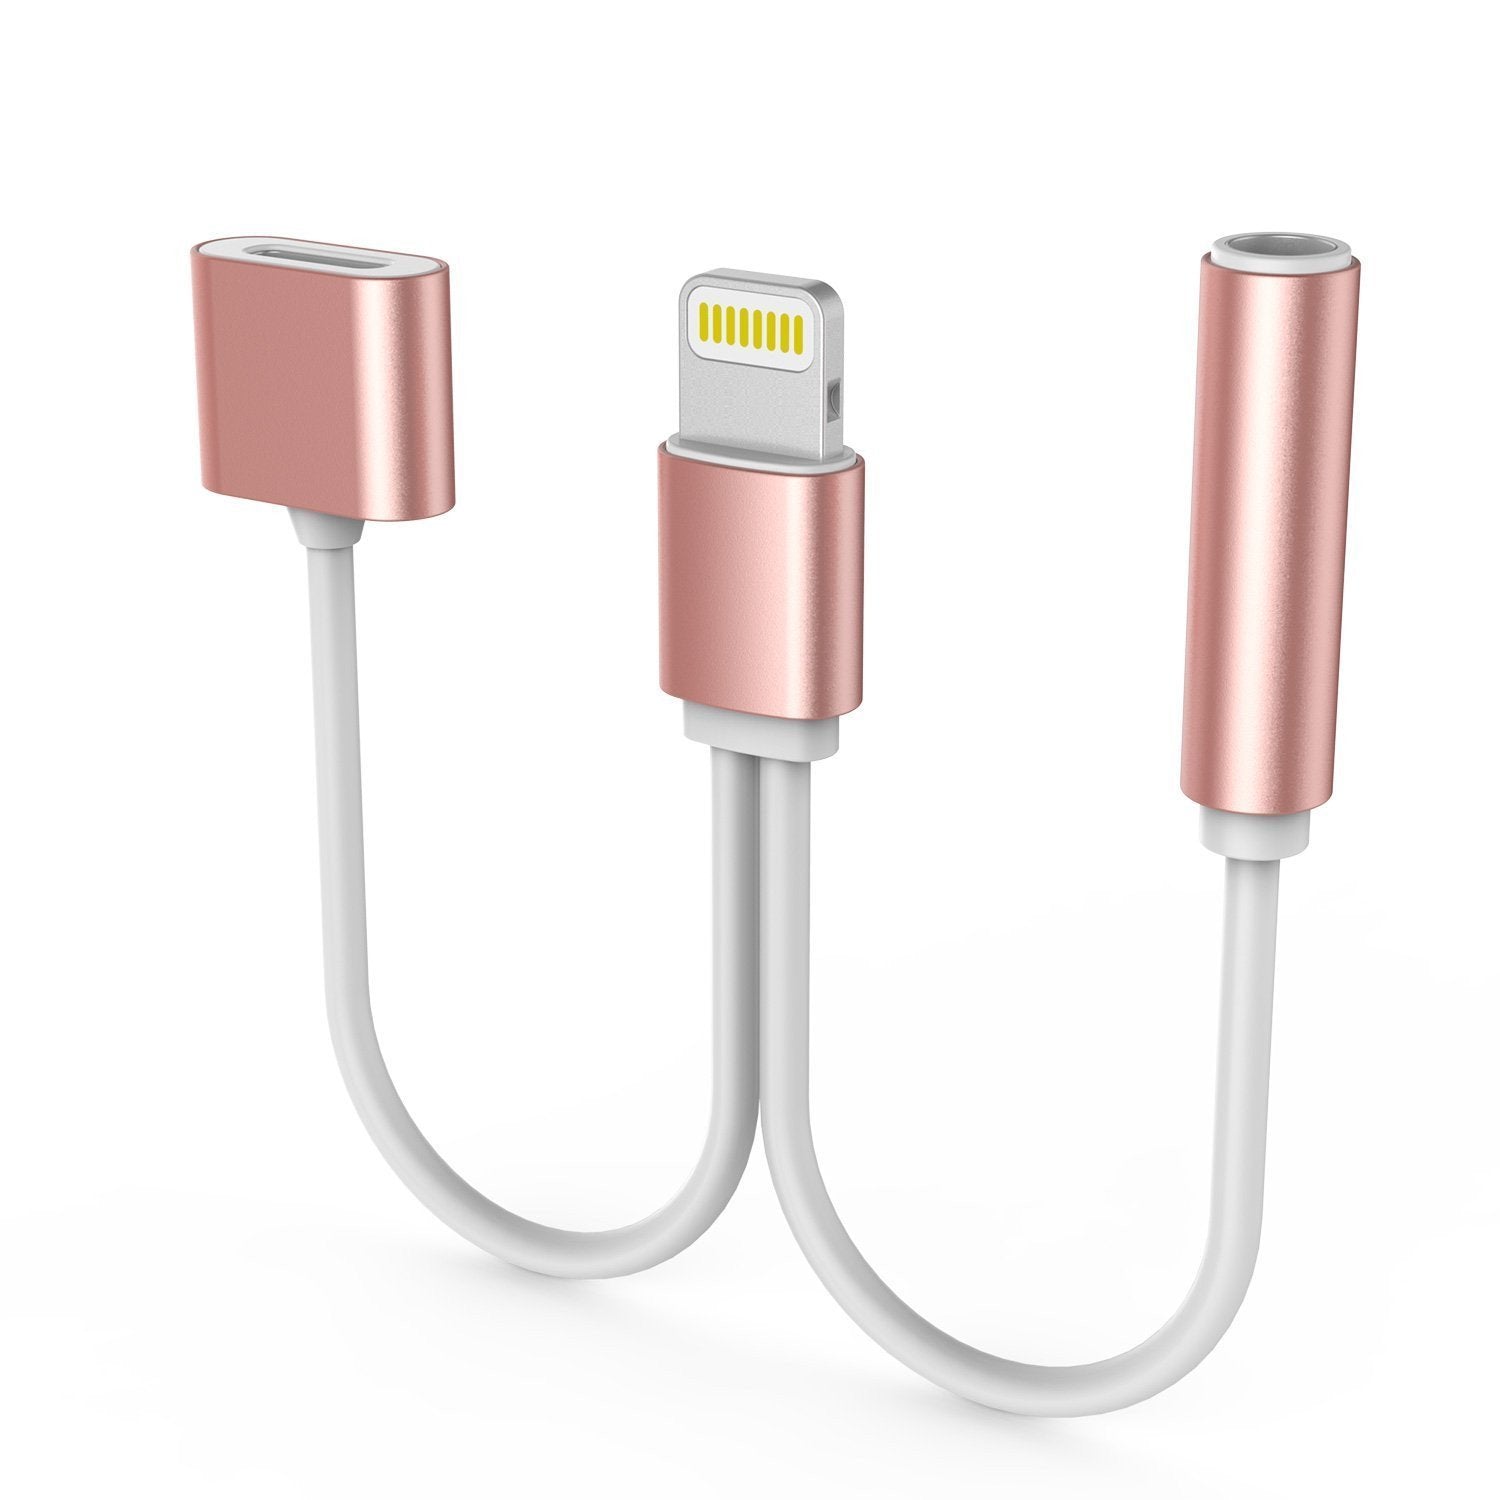 PUNKZAP Lightning Adapter Cable 2 in 1 Splitter Charger [ROSE]